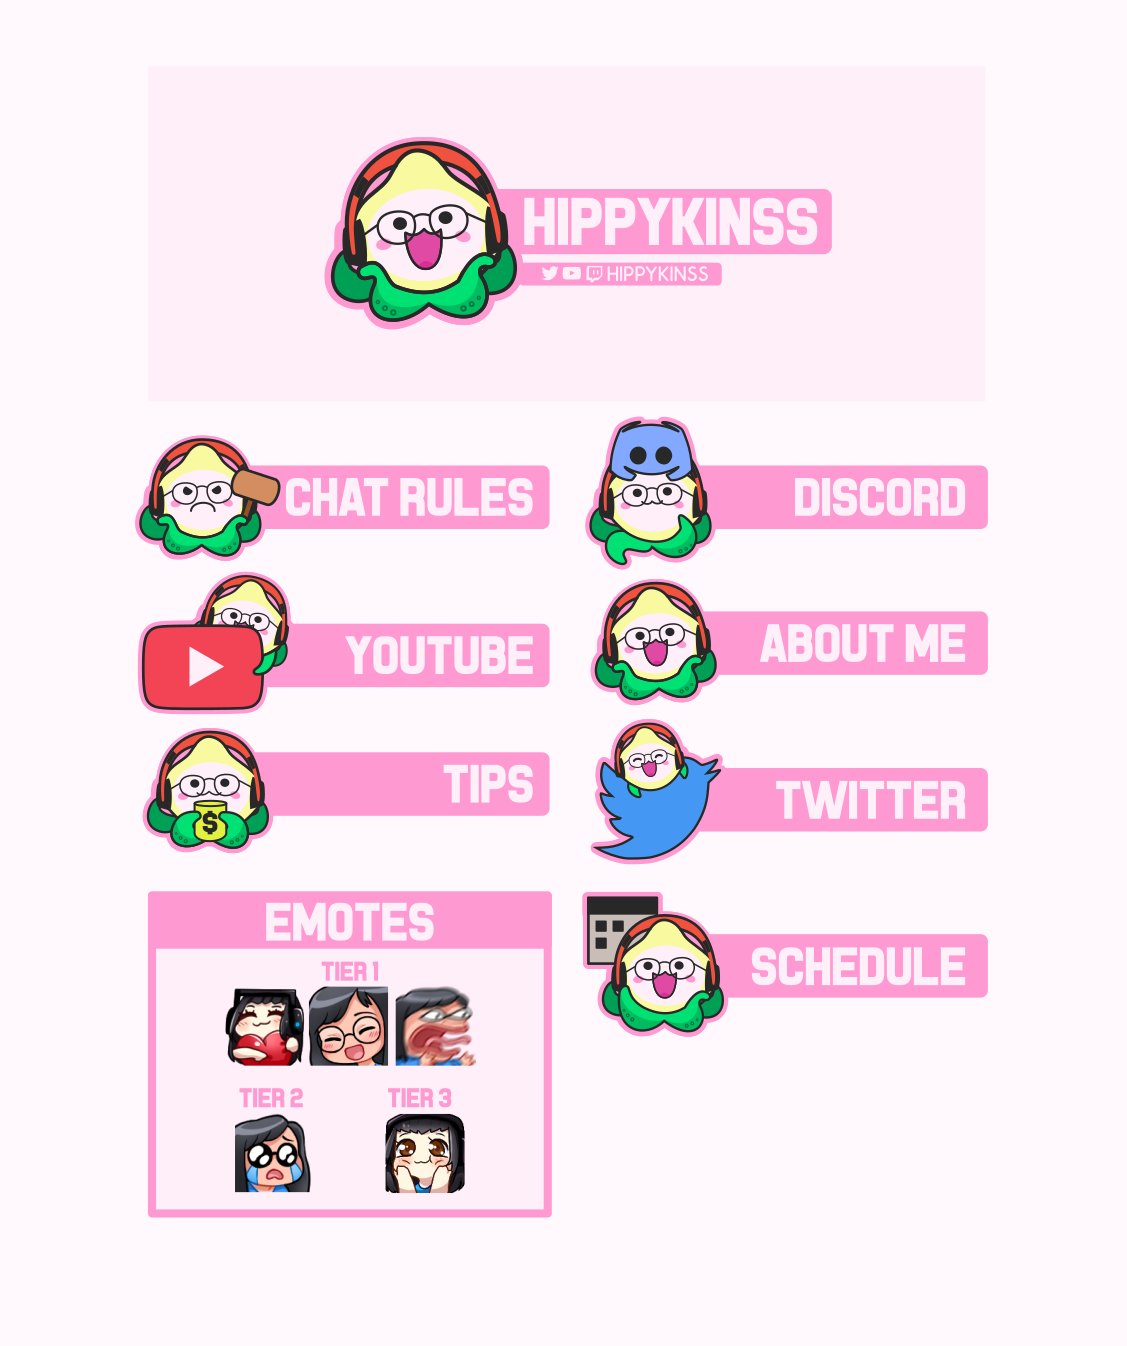 Twitch graphics for Hippykinss. Designed by Johnery